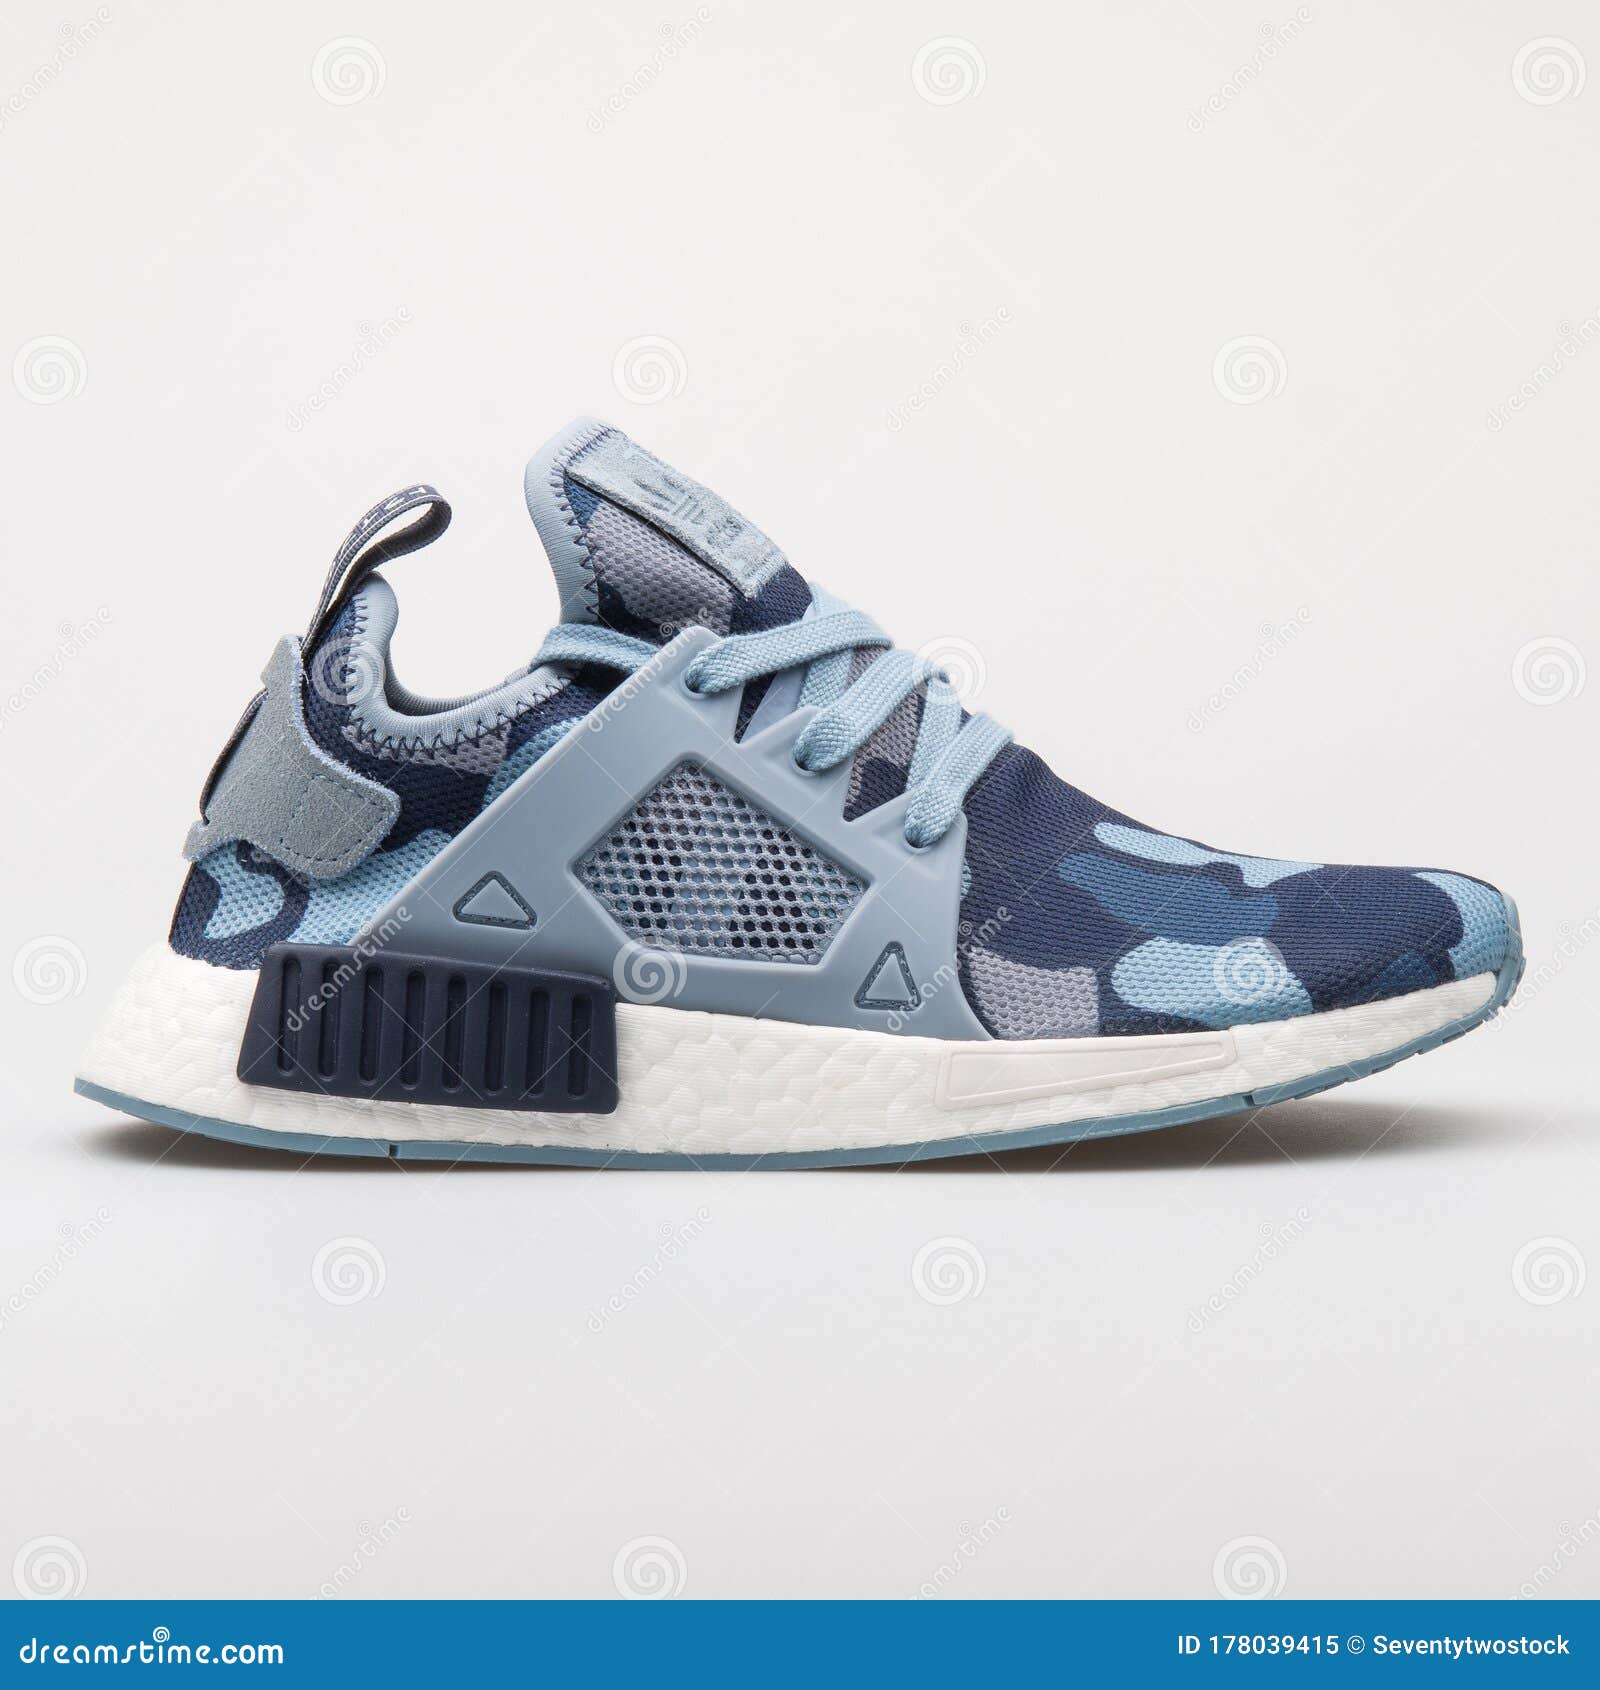 Adidas NMD XR1 winter shoes olive Stylefile